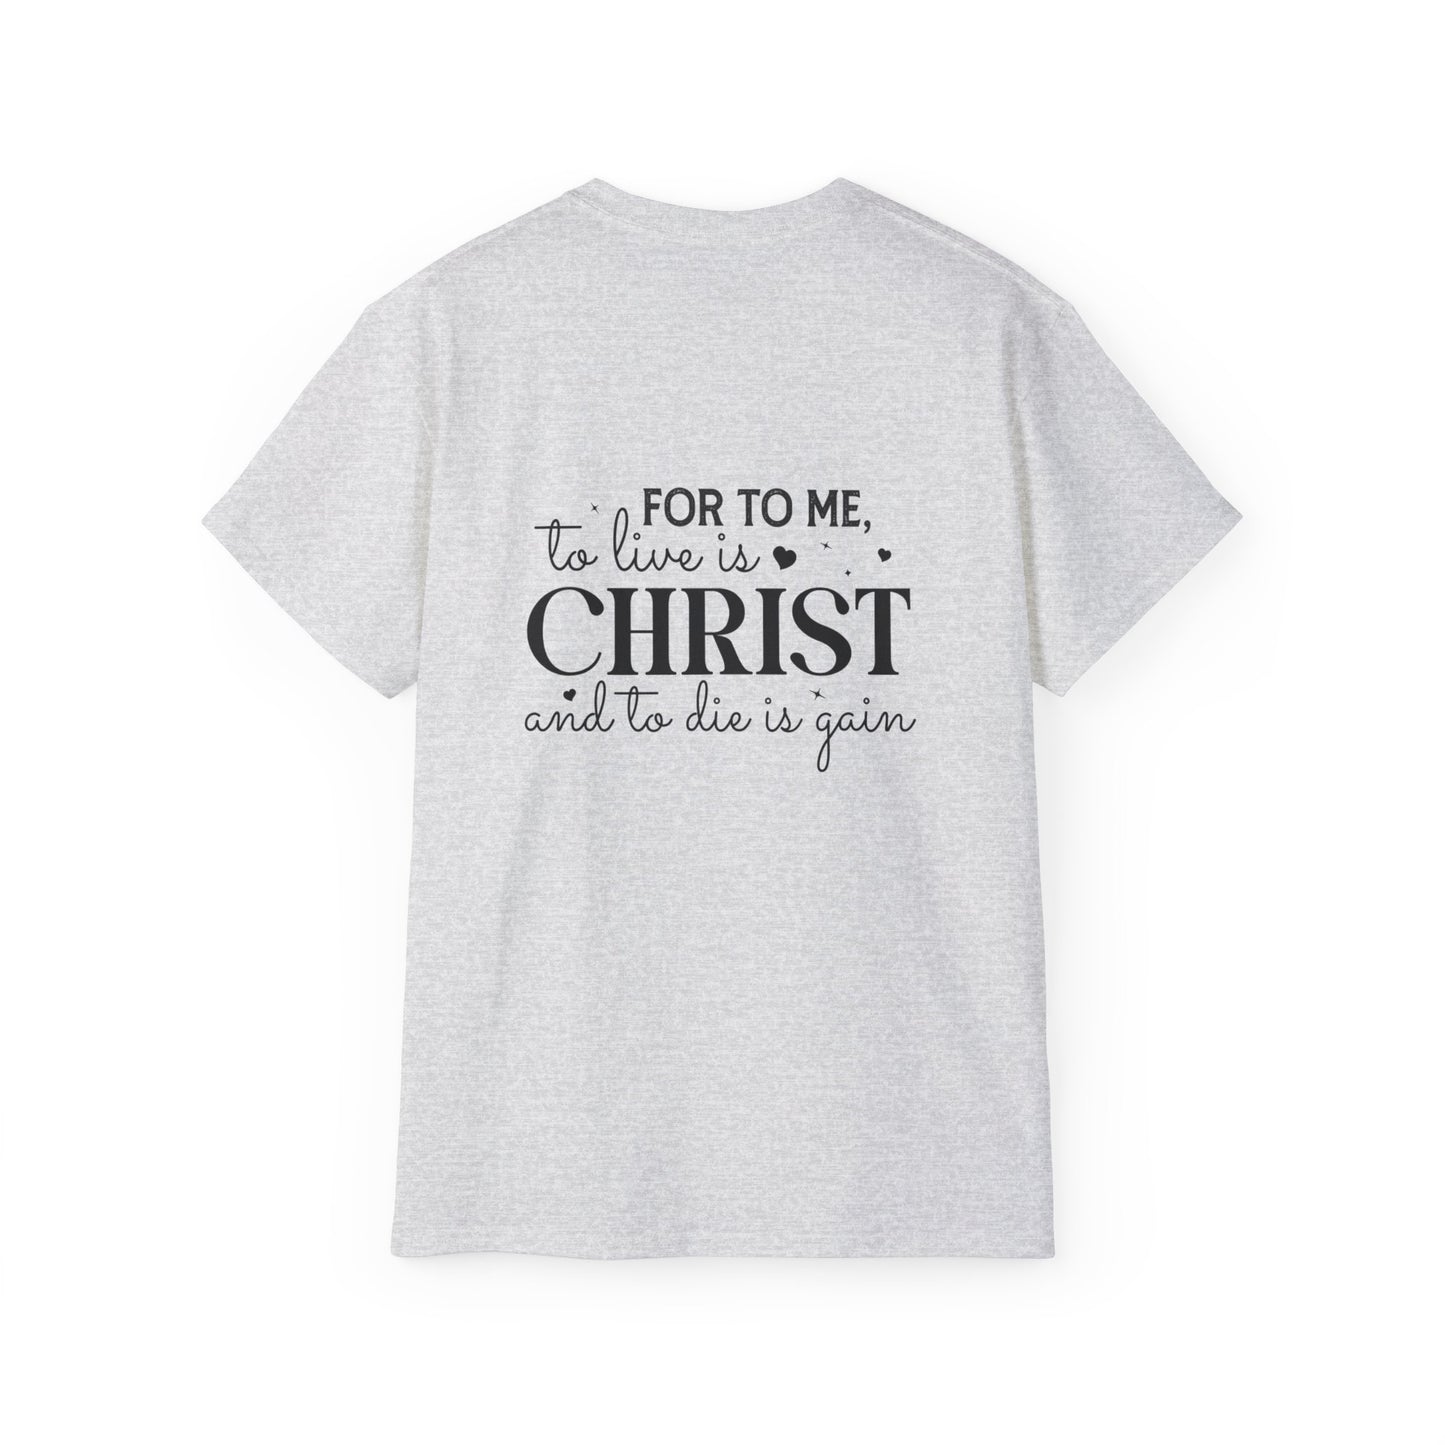 Phillippians 1:21 Devoted To His Calling Unisex Christian Ultra Cotton Tee Printify